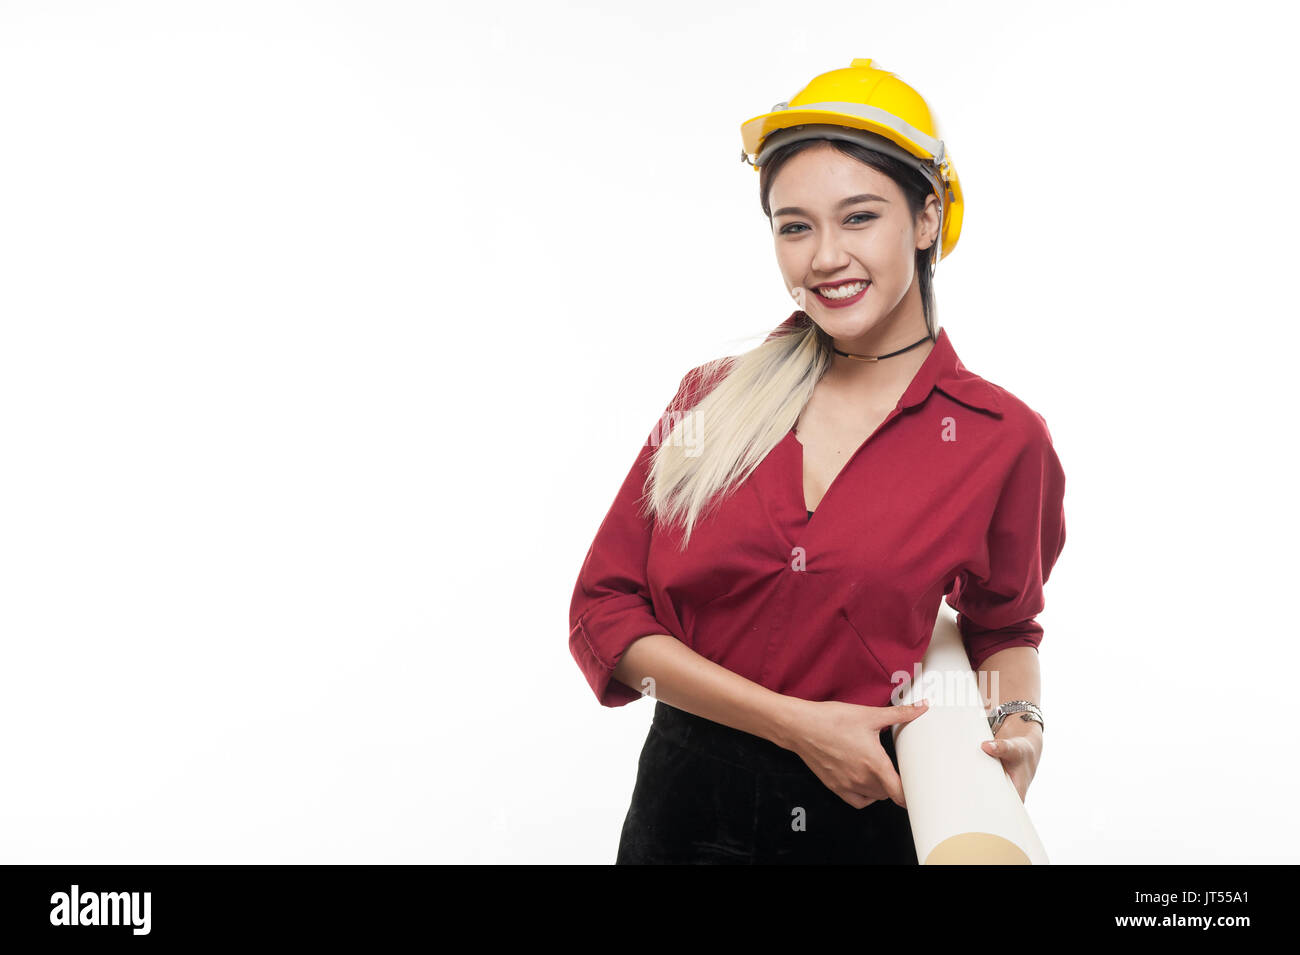 Young Asian woman architect with red shirt and yellow safety helmet smiling while carrying blueprint papers. Industrial occupation people concept Stock Photo